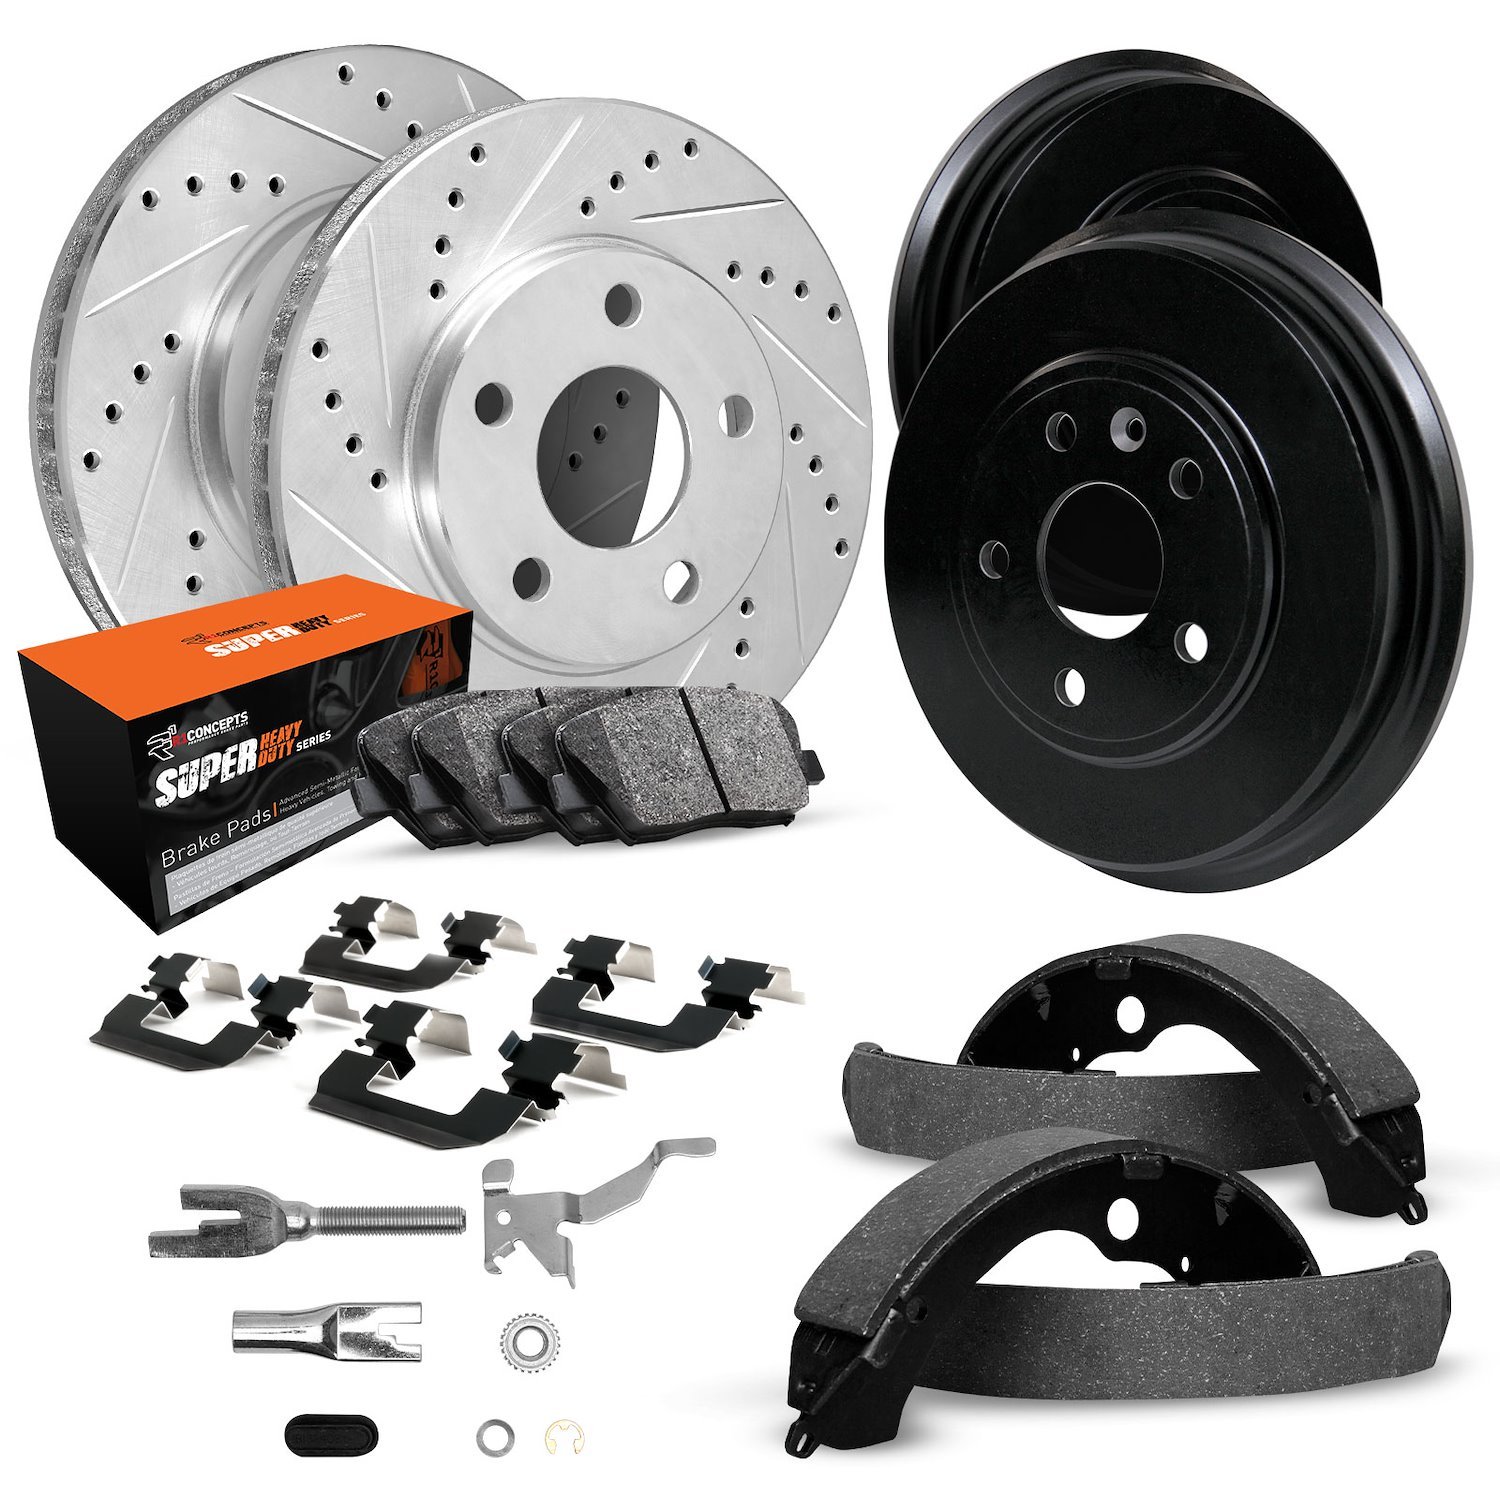 E-Line Drilled/Slotted Silver Rotor & Drum Set w/Super-Duty Pads, Shoes/Hardware/Adjusters, 1990-1992 Mopar